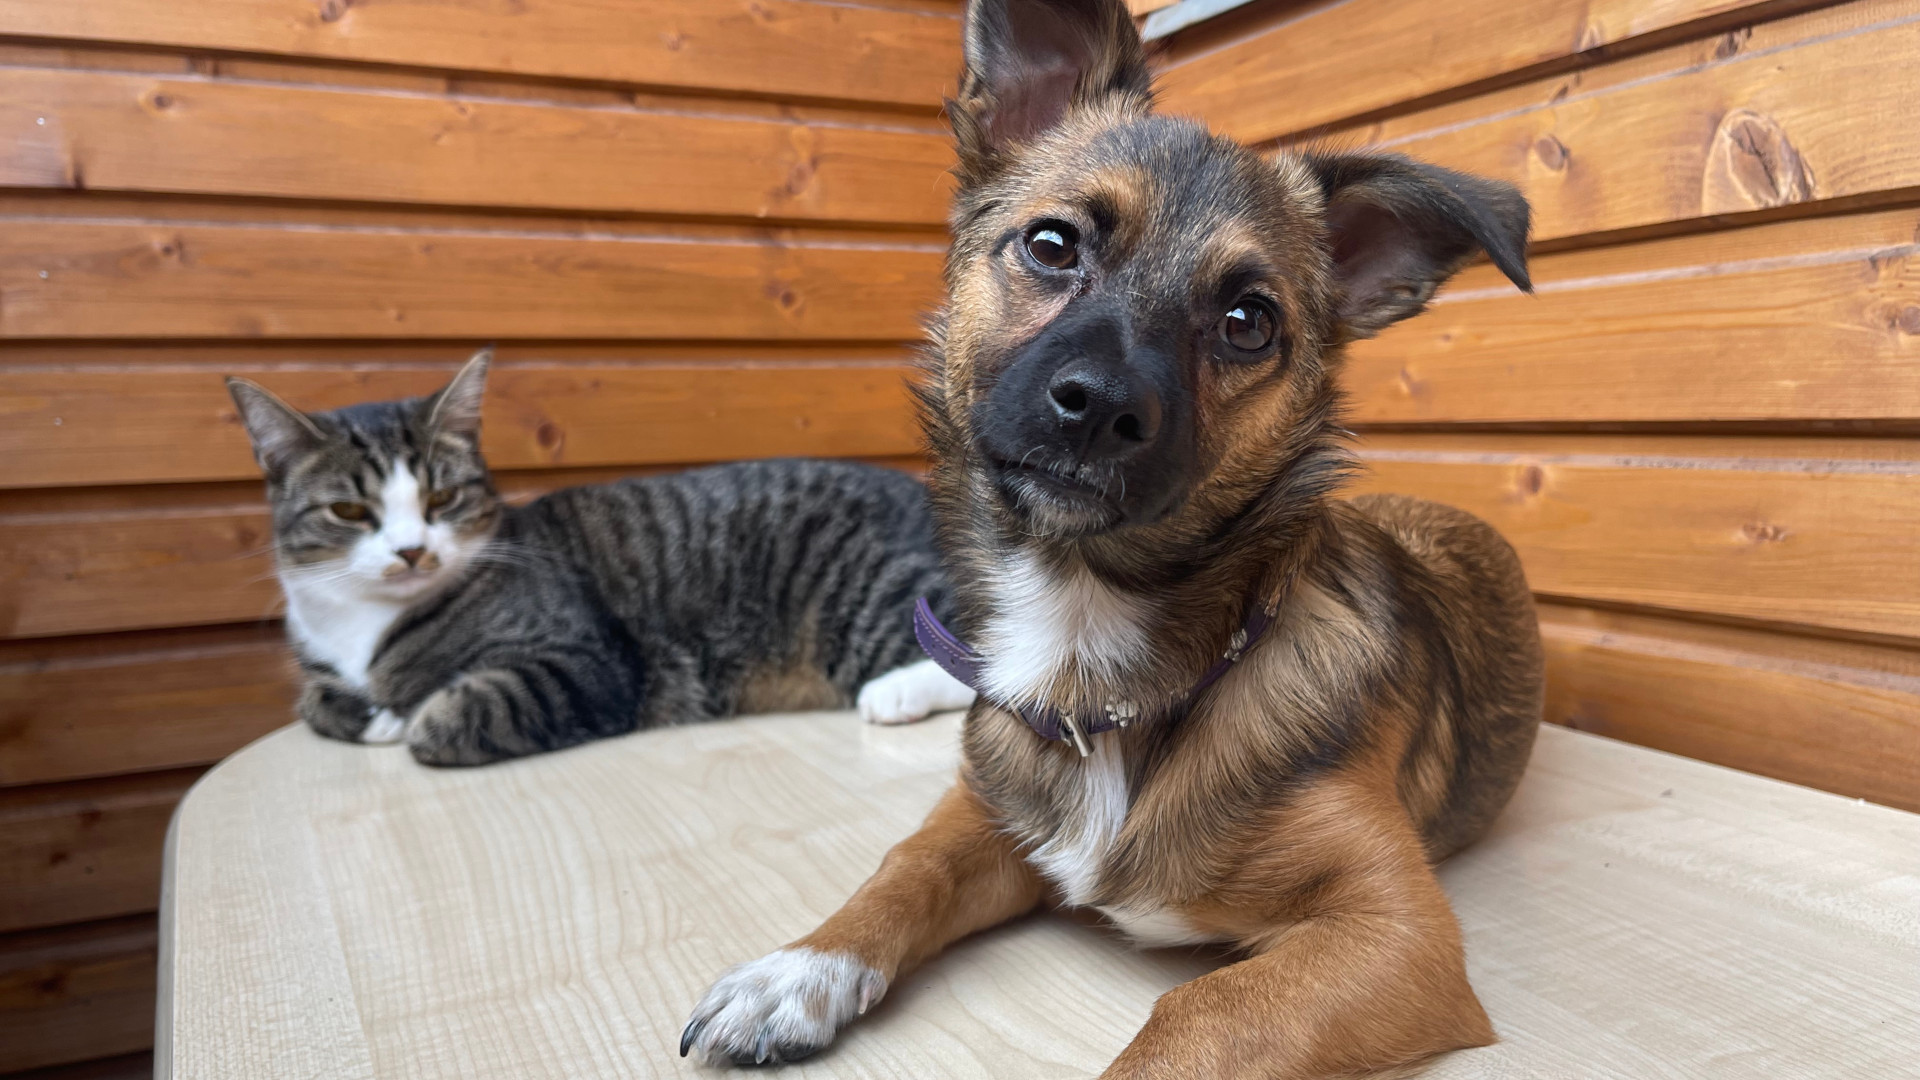 A cat and puppy relaxing